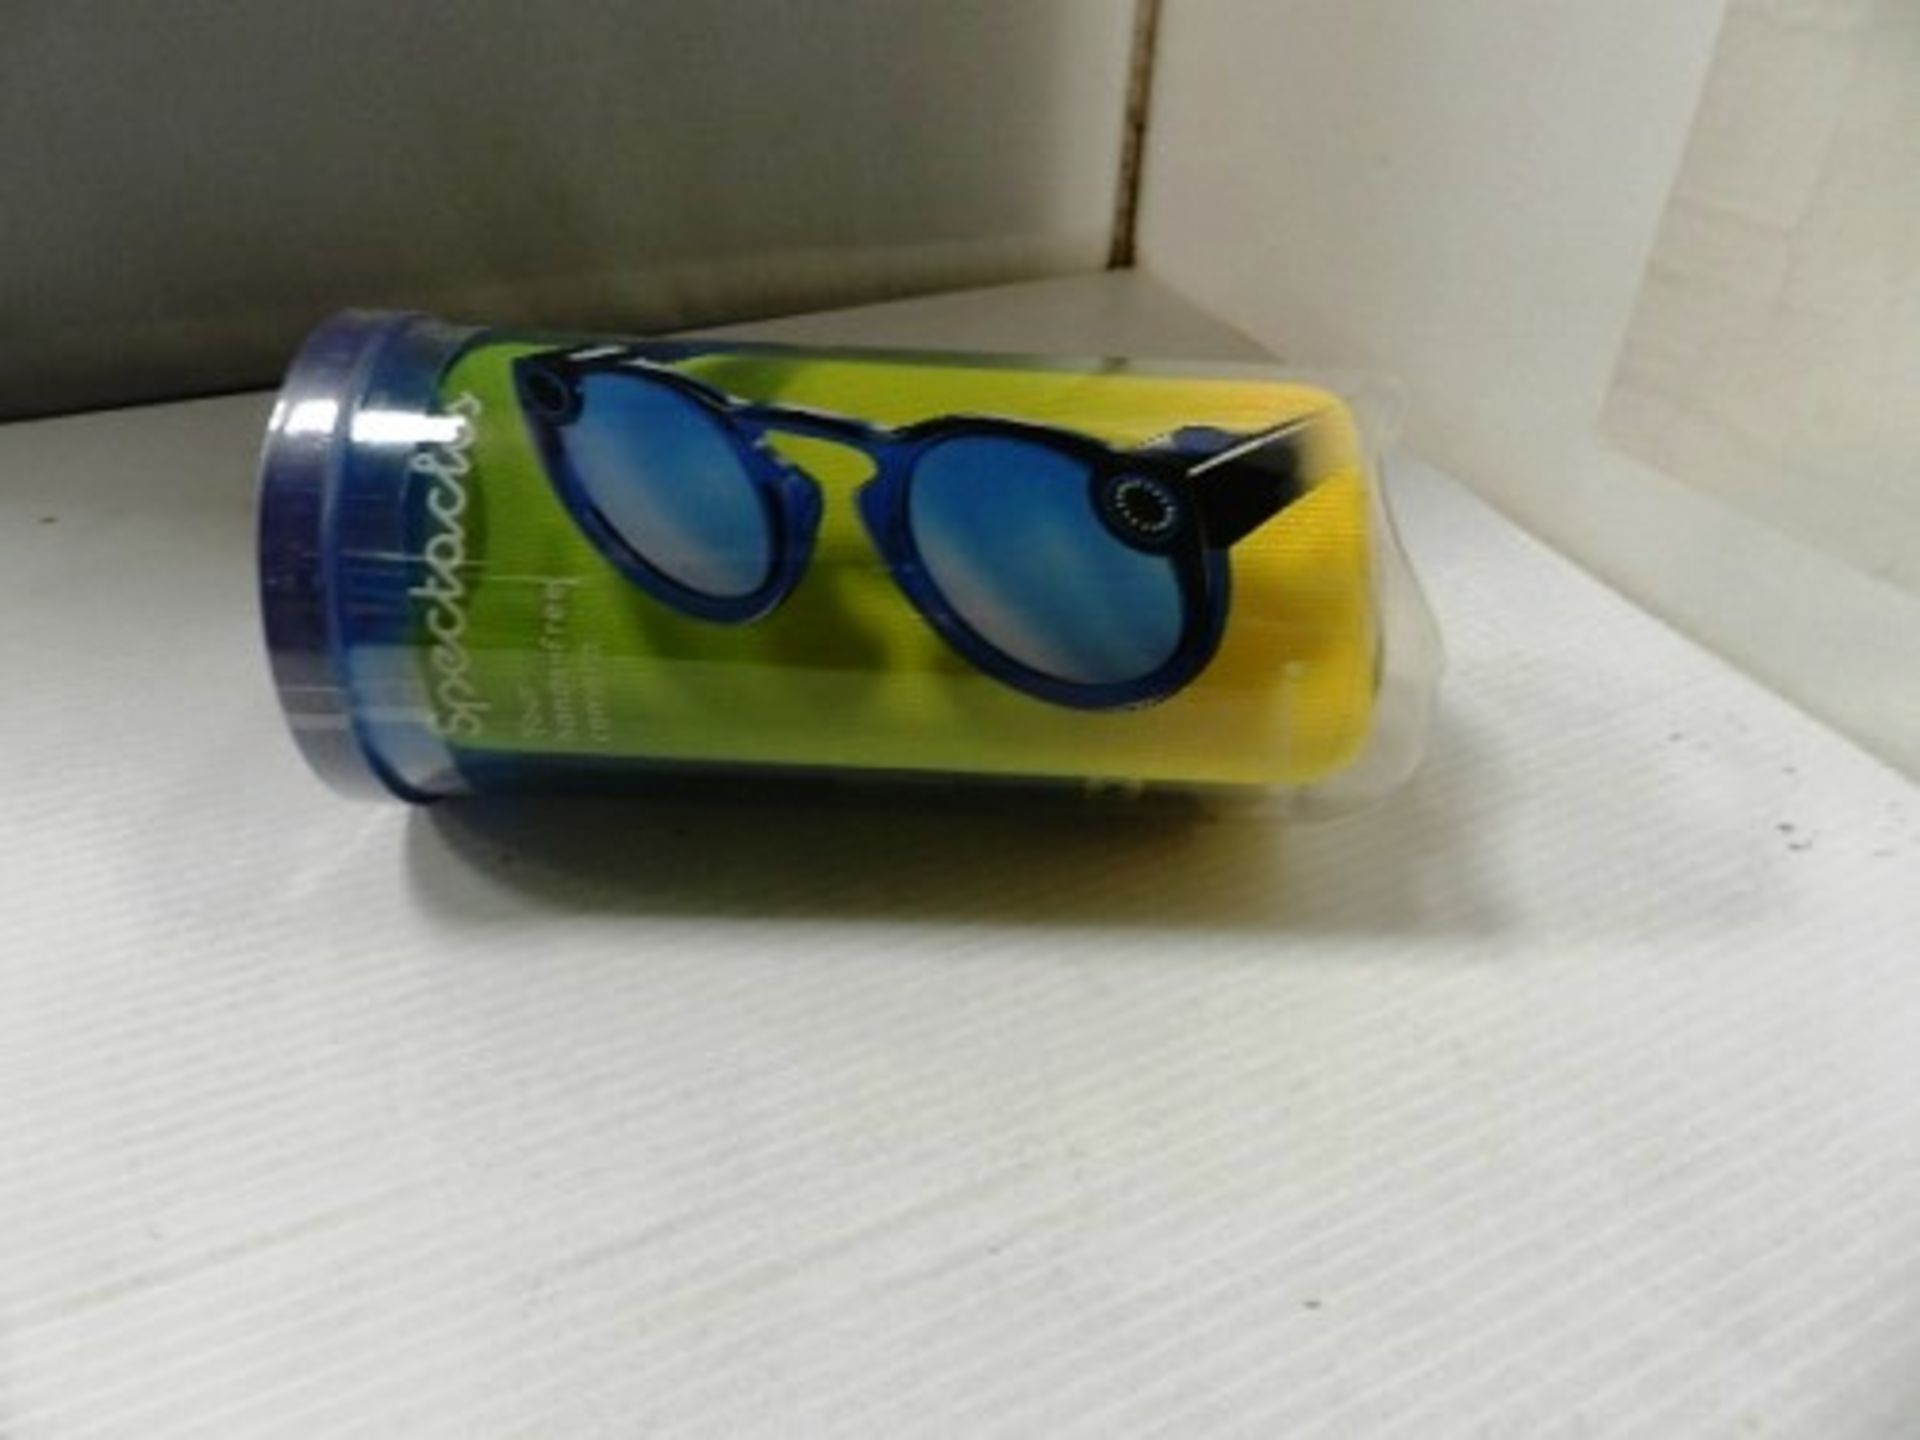 1 x Camera Spectacles made for iPhone, Spectacles, Your Hands Free Camera, RRP £149.00 - New (C12B)